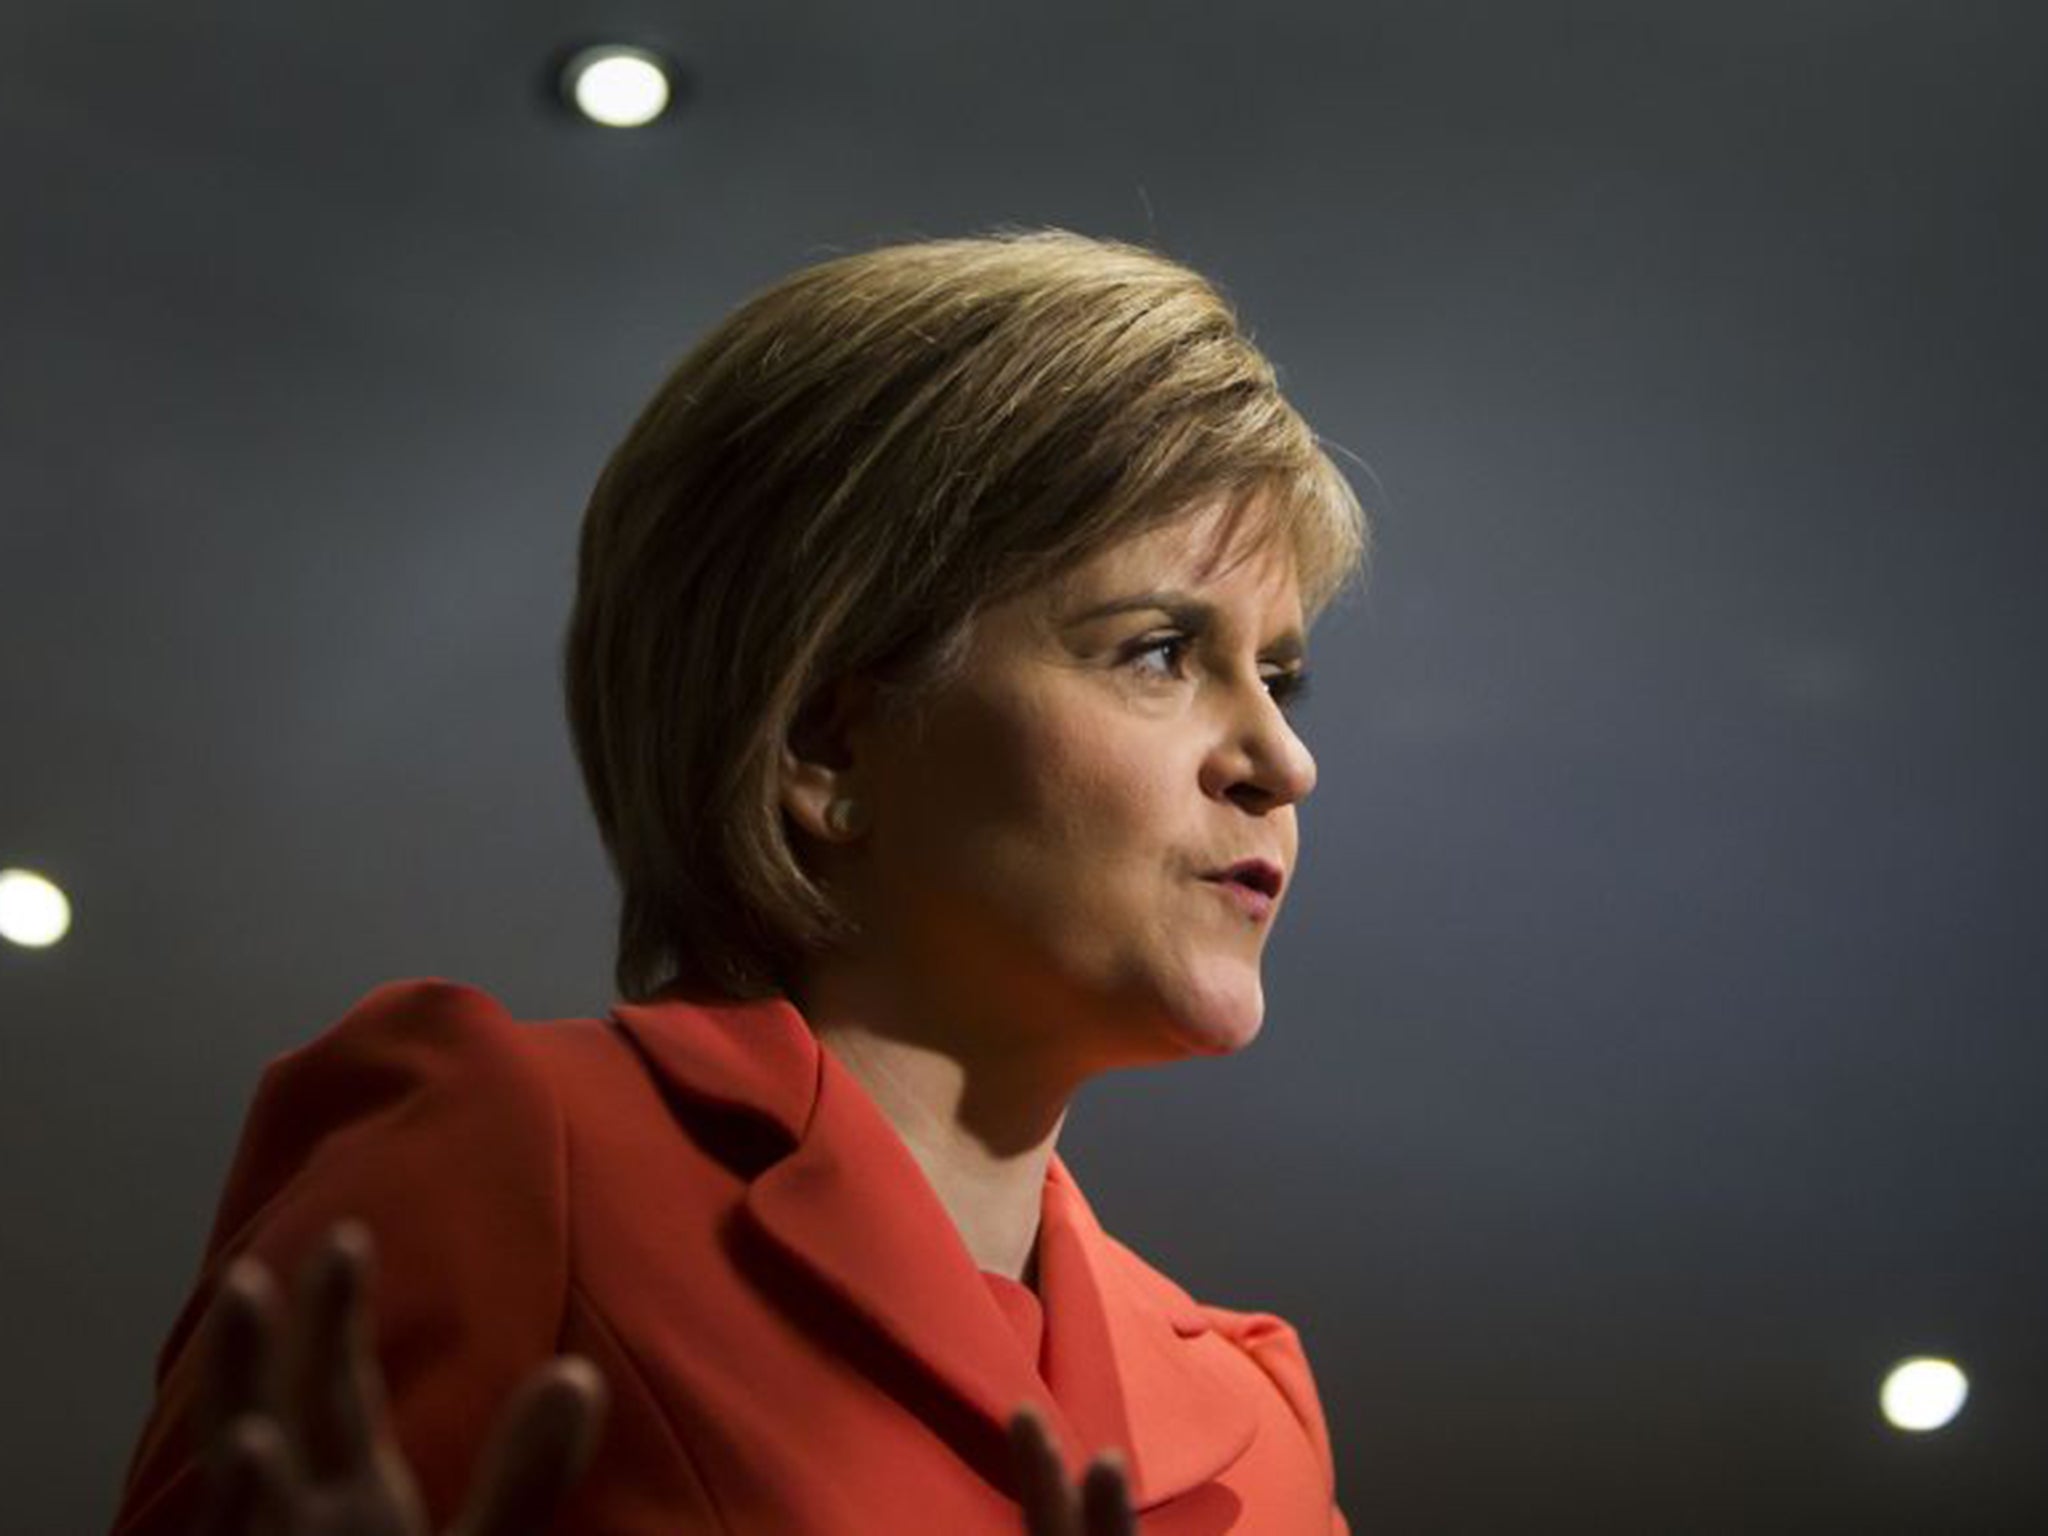 A latest poll has suggested that Nicola Sturgeon's party, the SNP, has almost doubled its lead over Labour in the general election race in Scotland